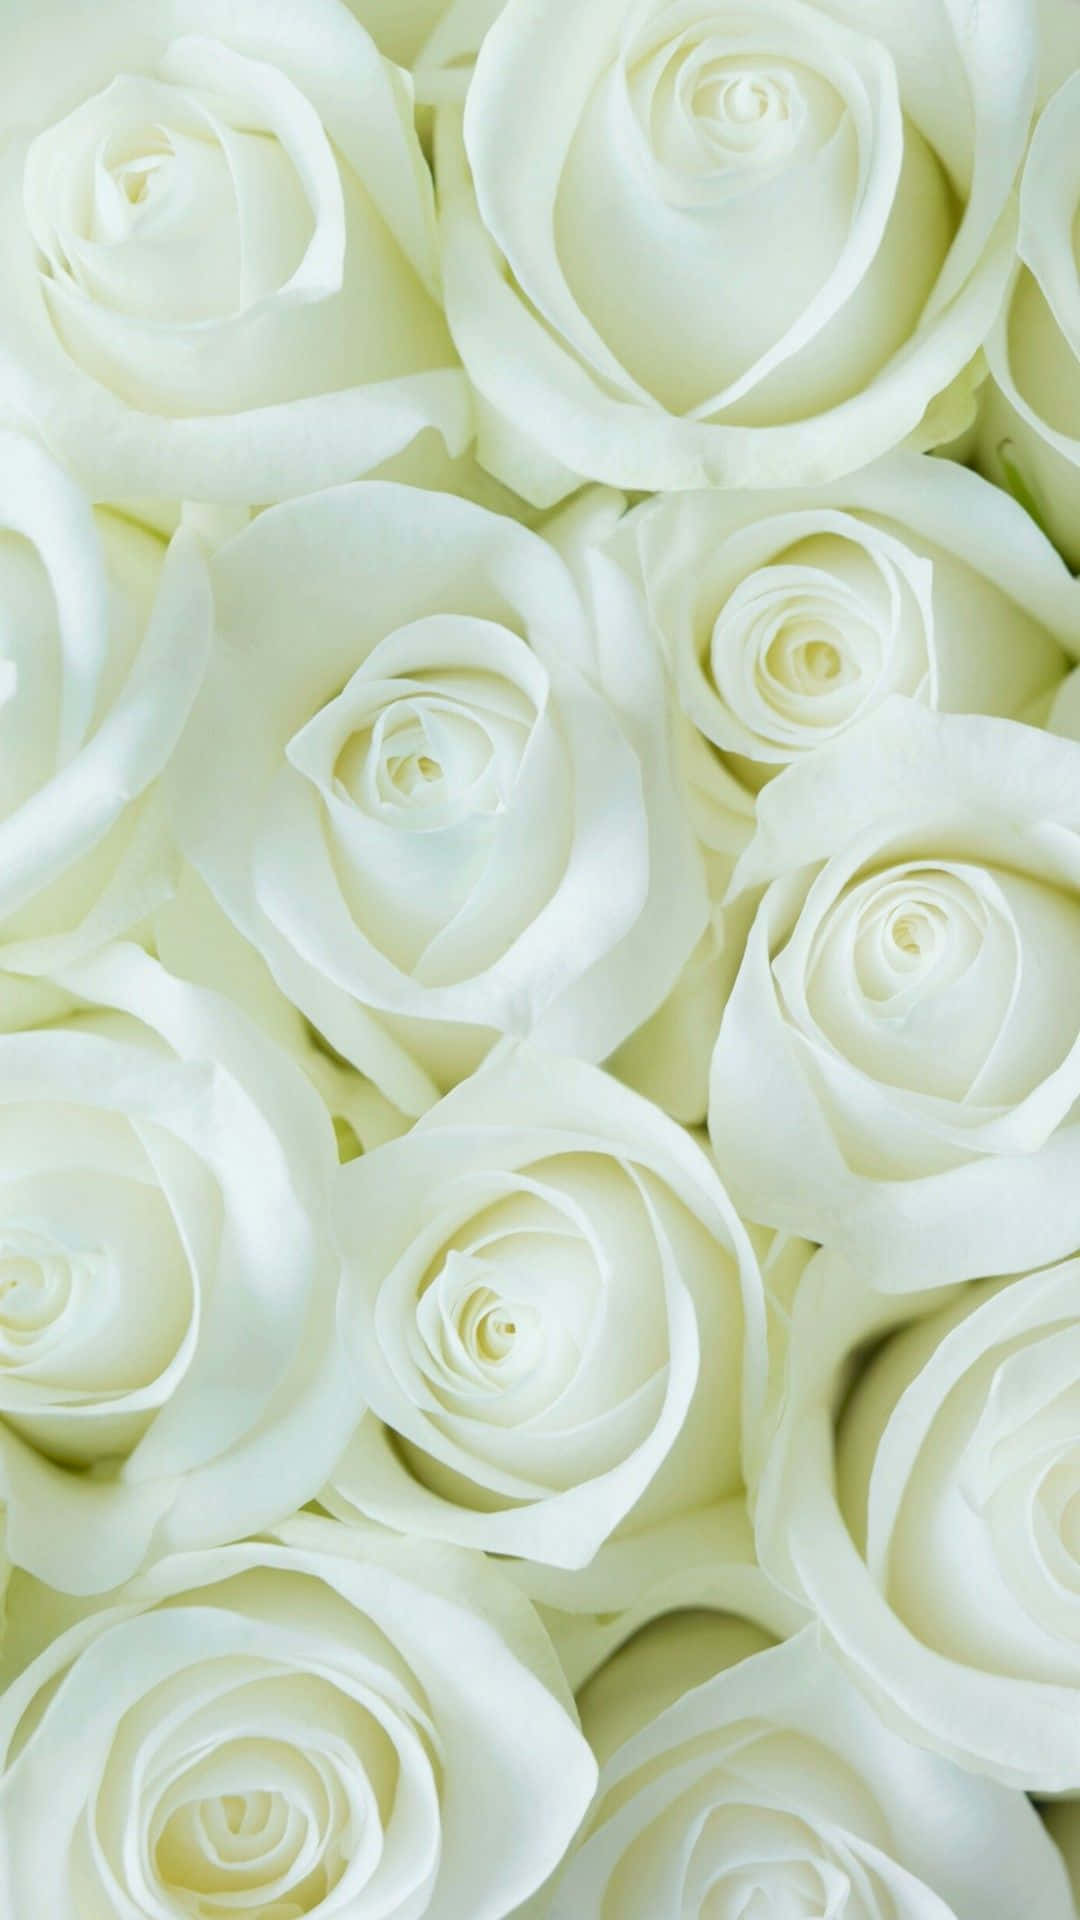 White Roses Iphone Top View Wallpaper